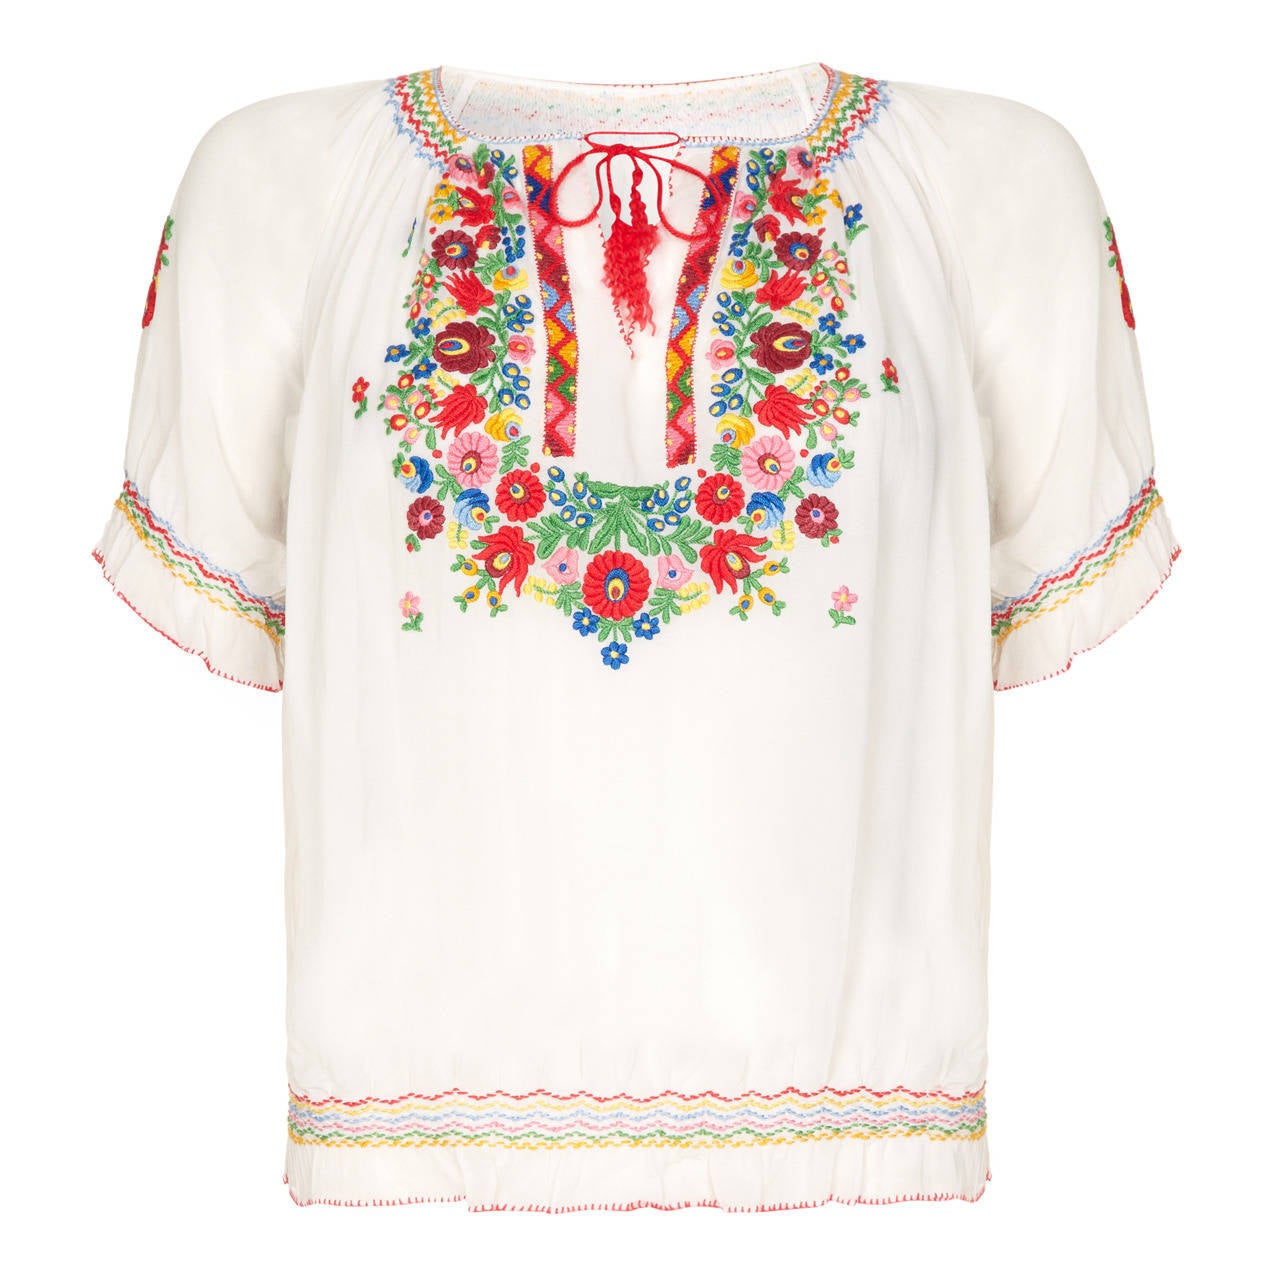 Greek hand-embroidered top - Shop homiselects Women's Tops - Pinkoi